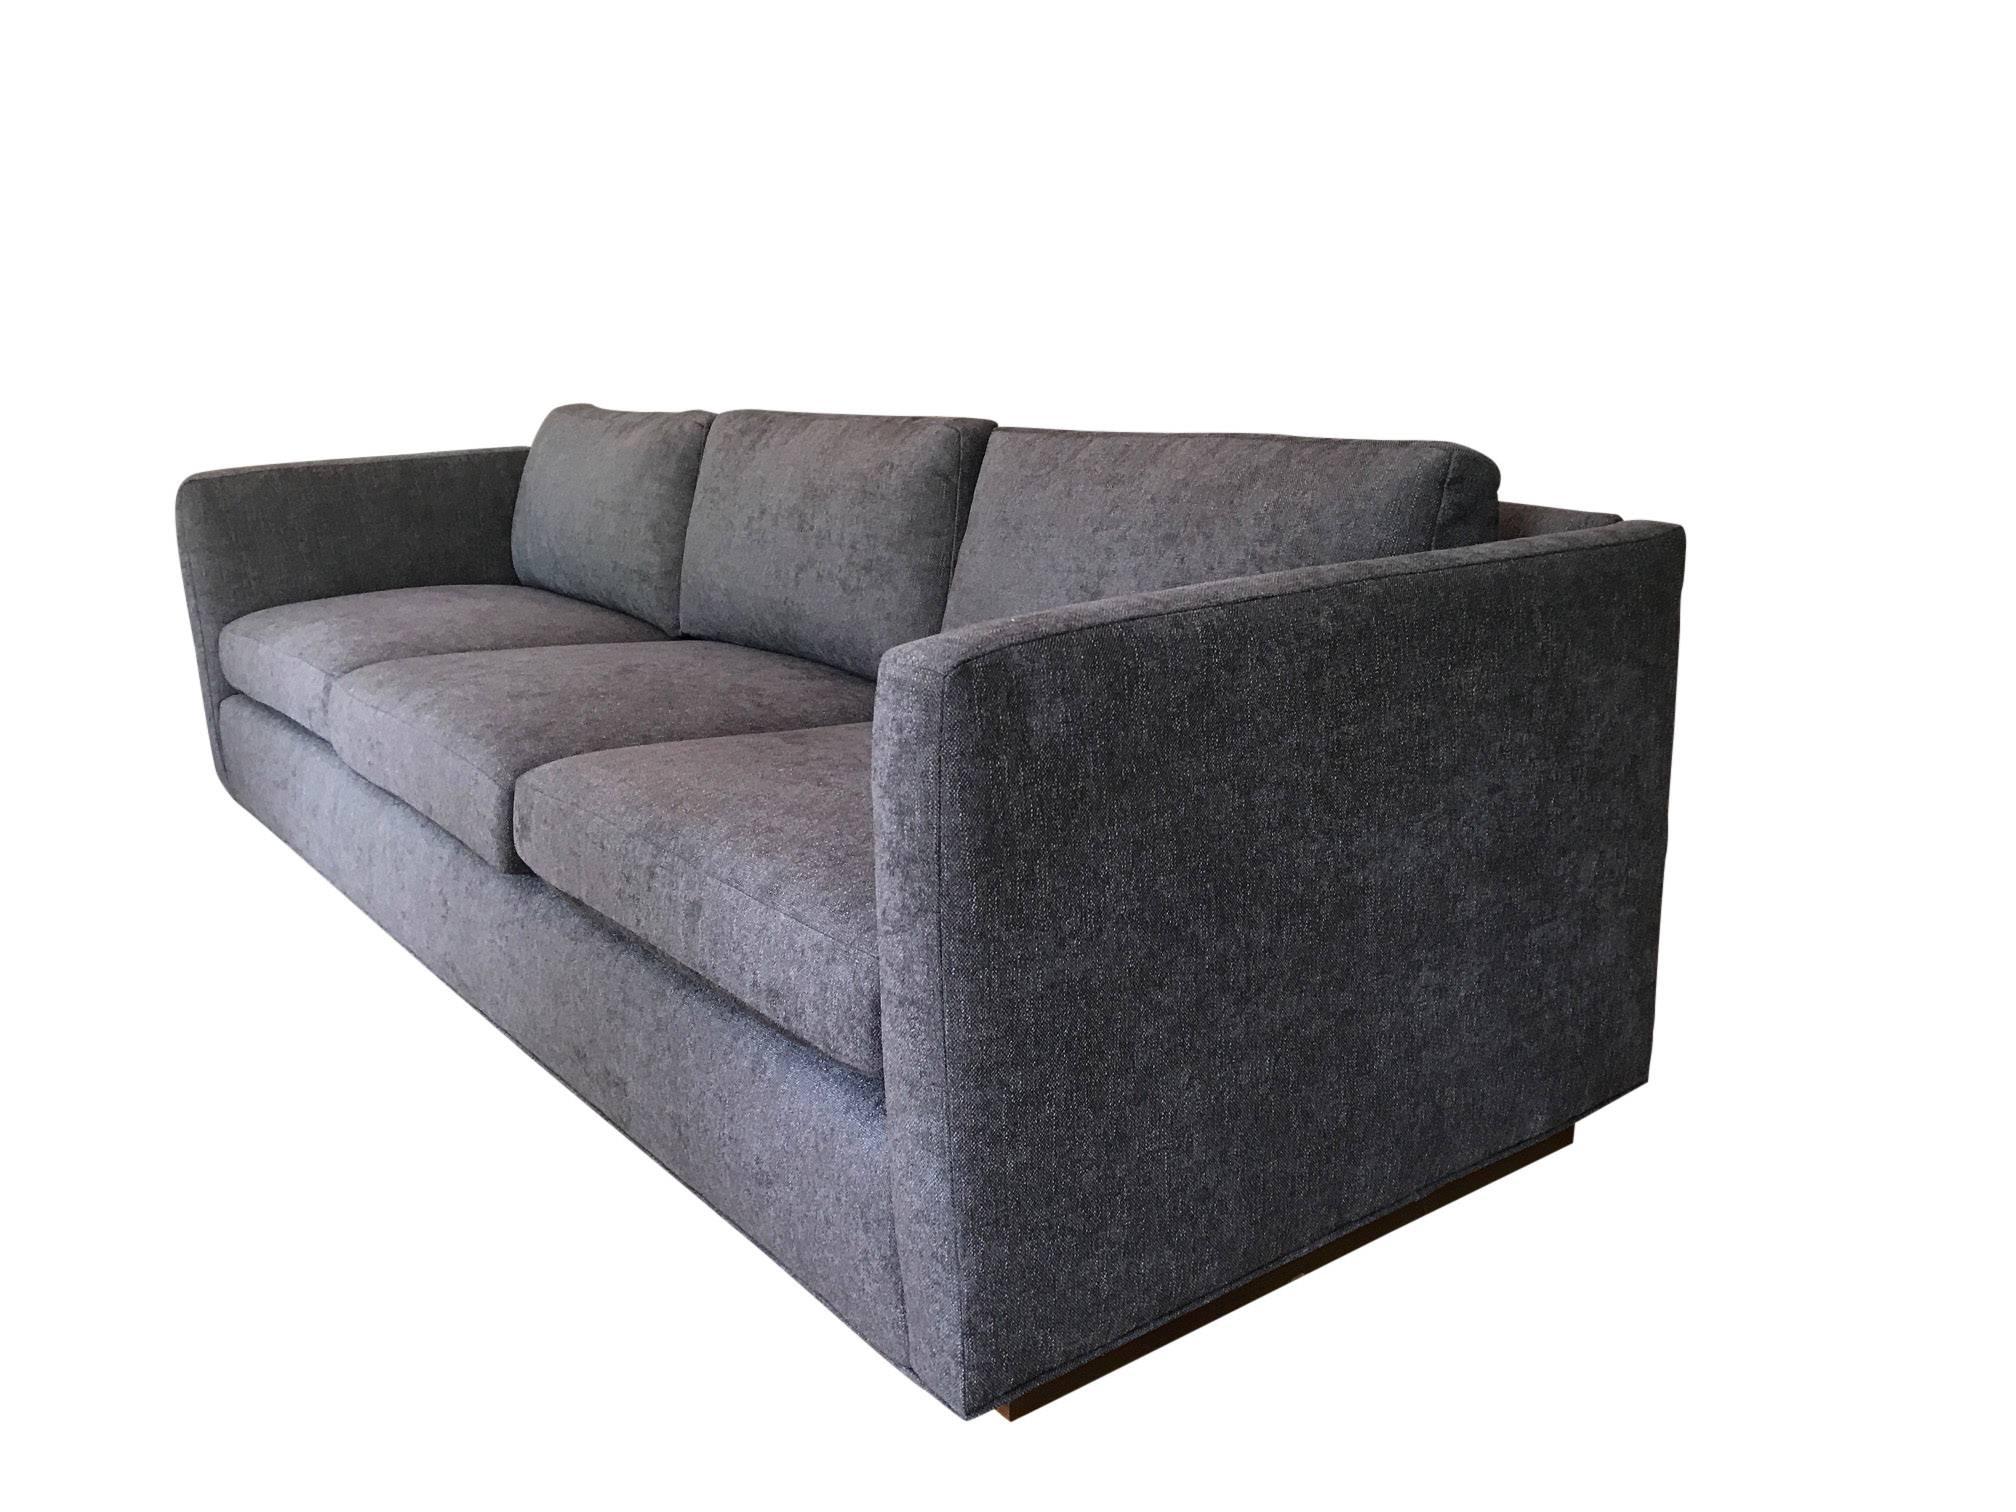 Stunning three-seat tuxedo Sofa designed by Milo Baughman for Thayer Coggin. Wood plinth base is raised on casters for a 